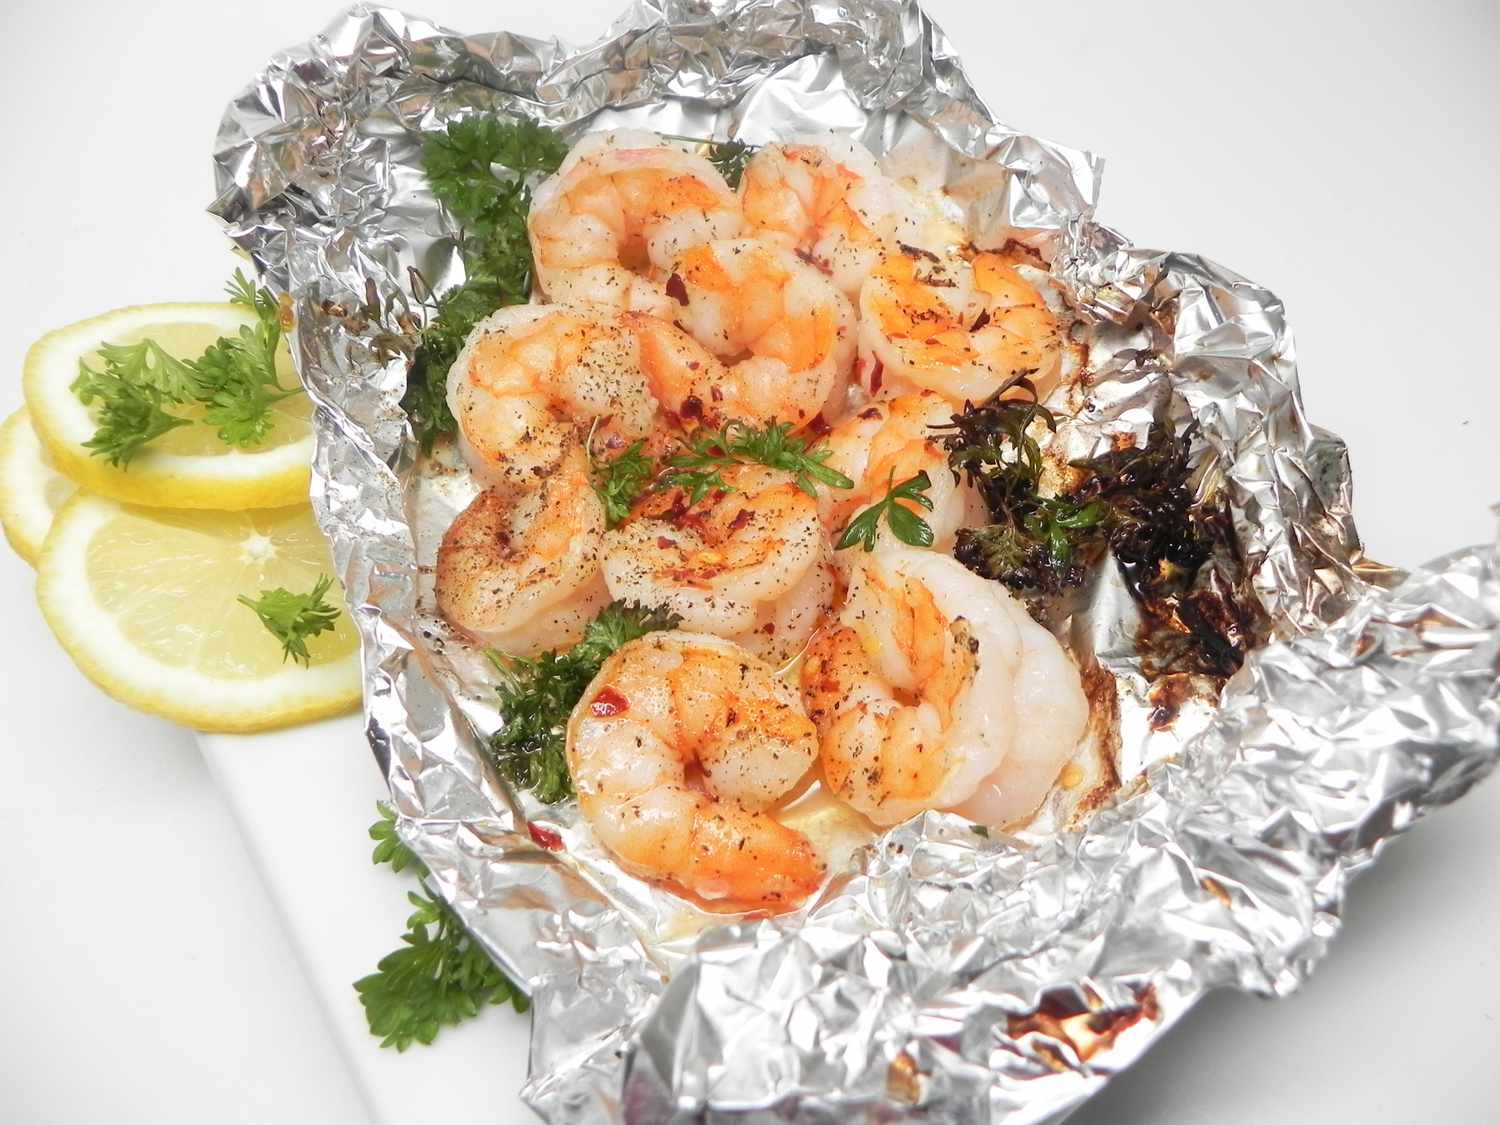 How To Grill Shrimp In Foil? 5+ most useful tips and tricks